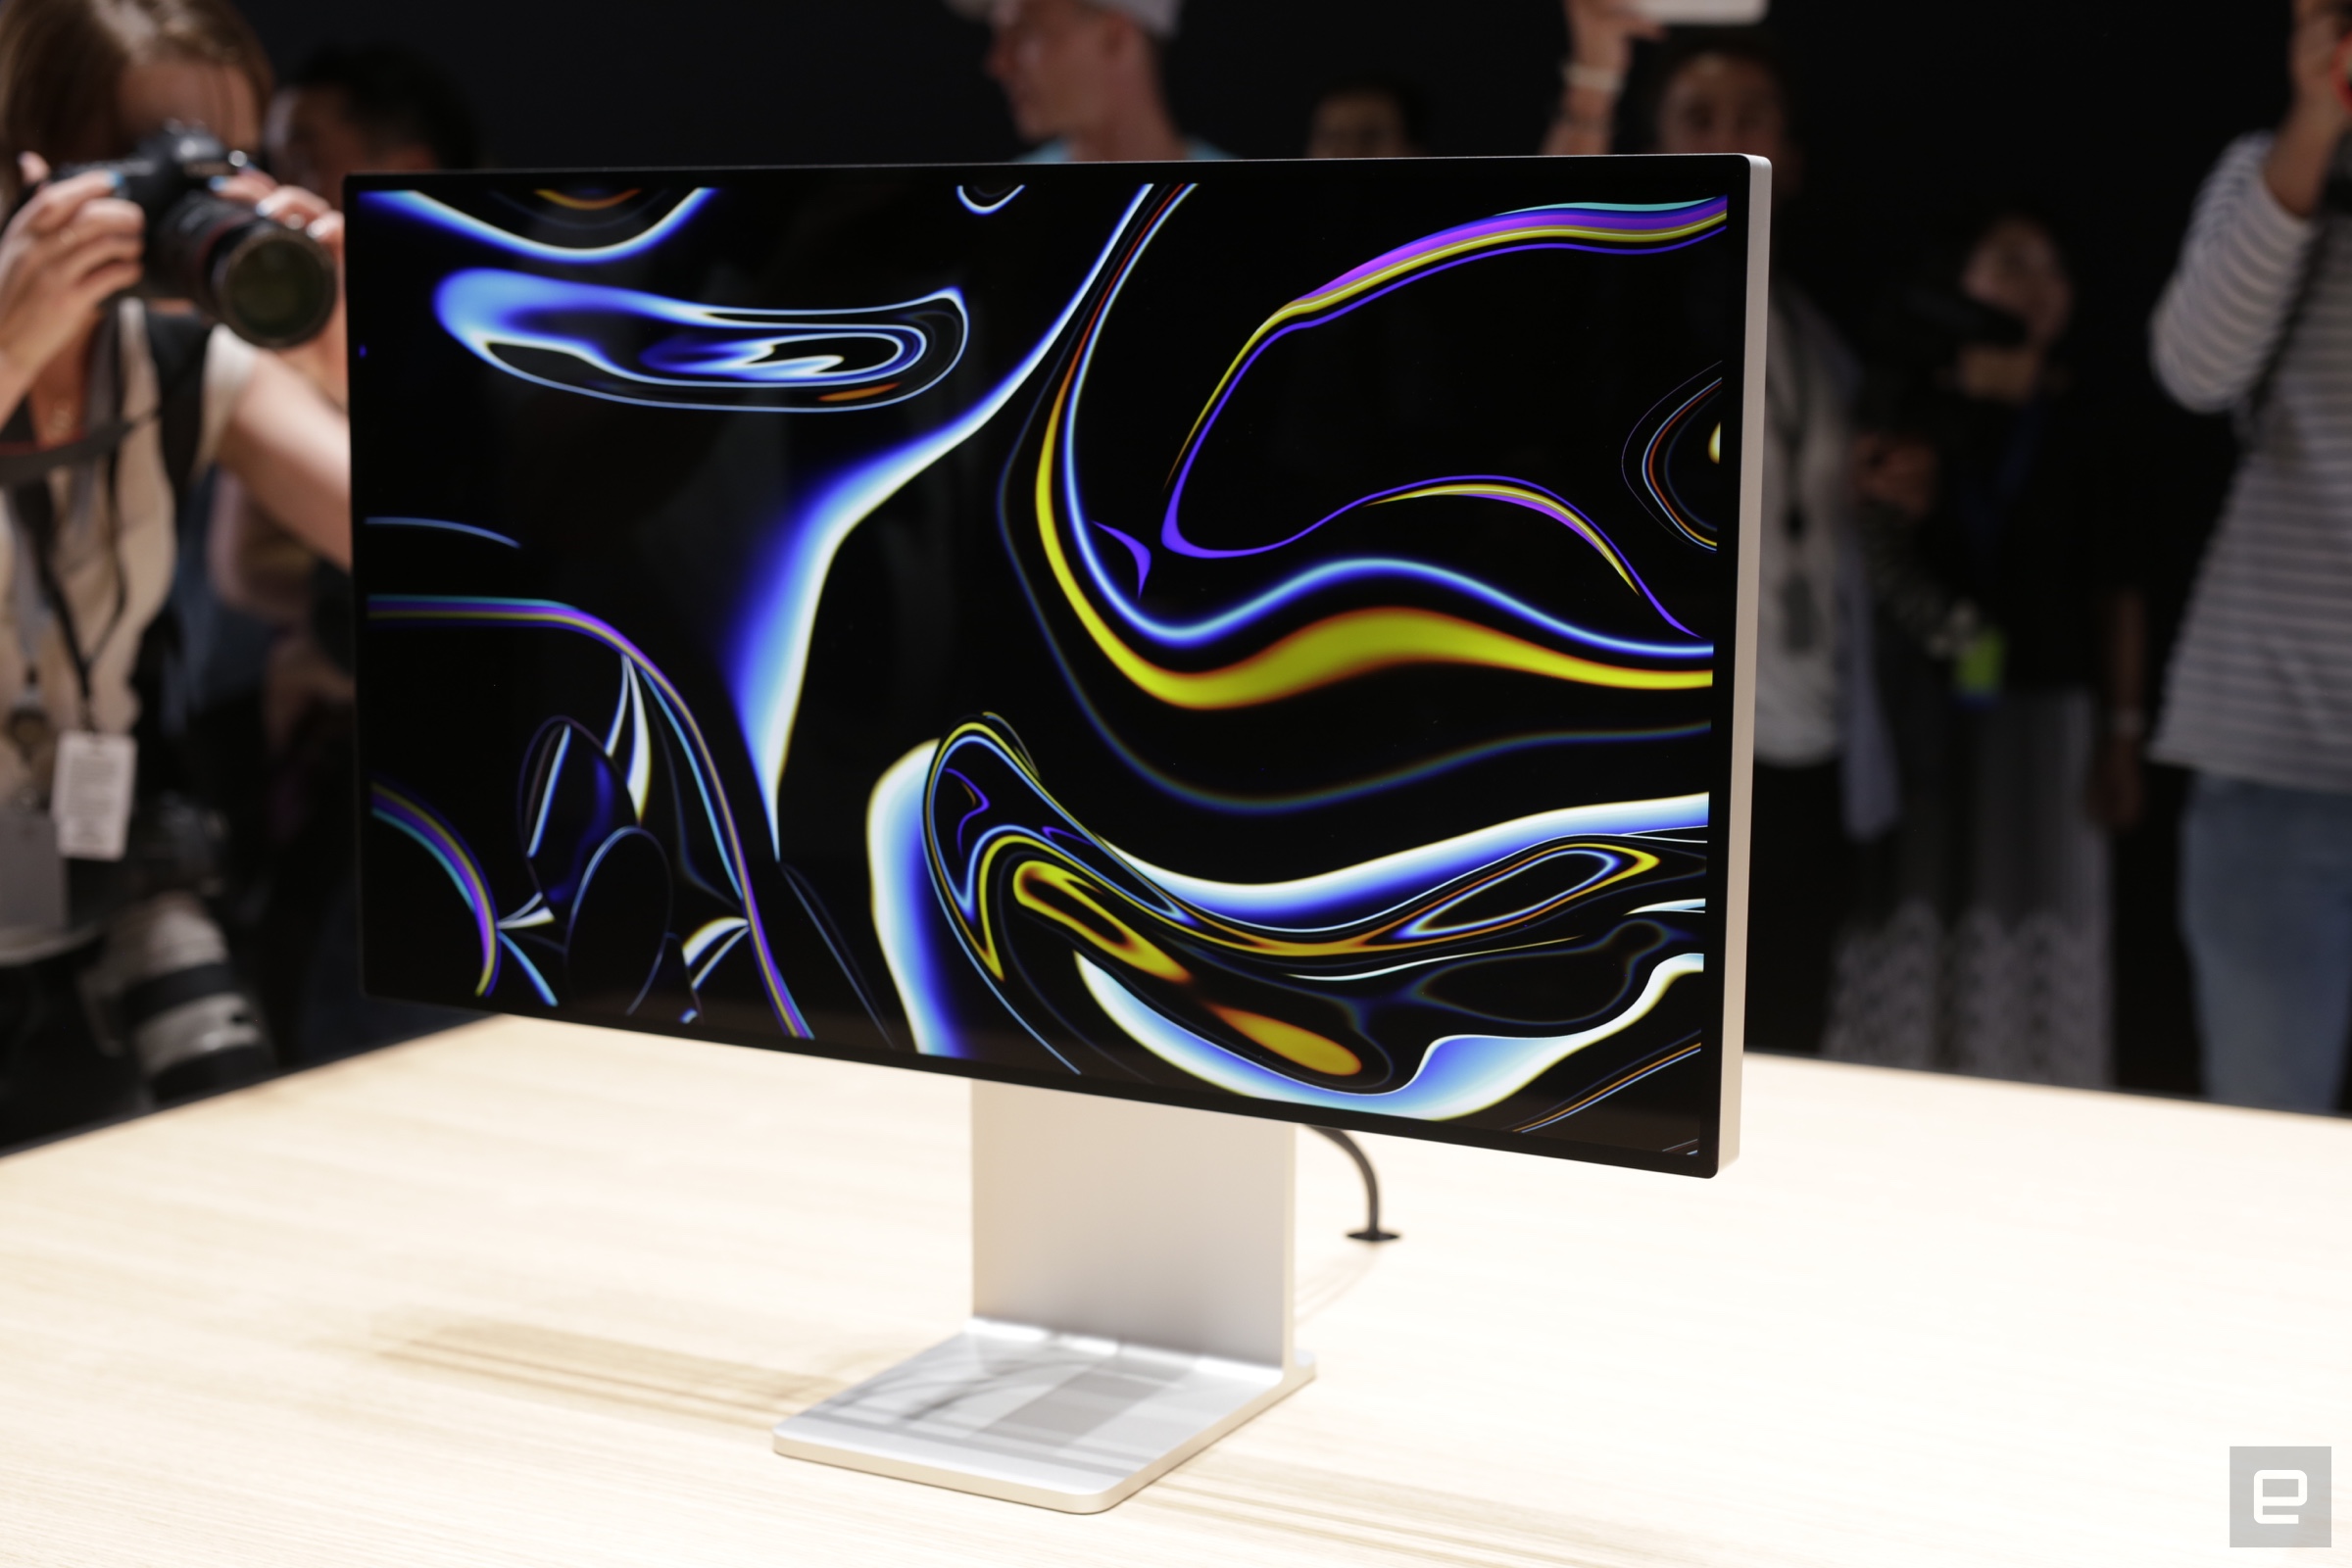 Apple is reportedly working on a new Pro Display XDR monitor